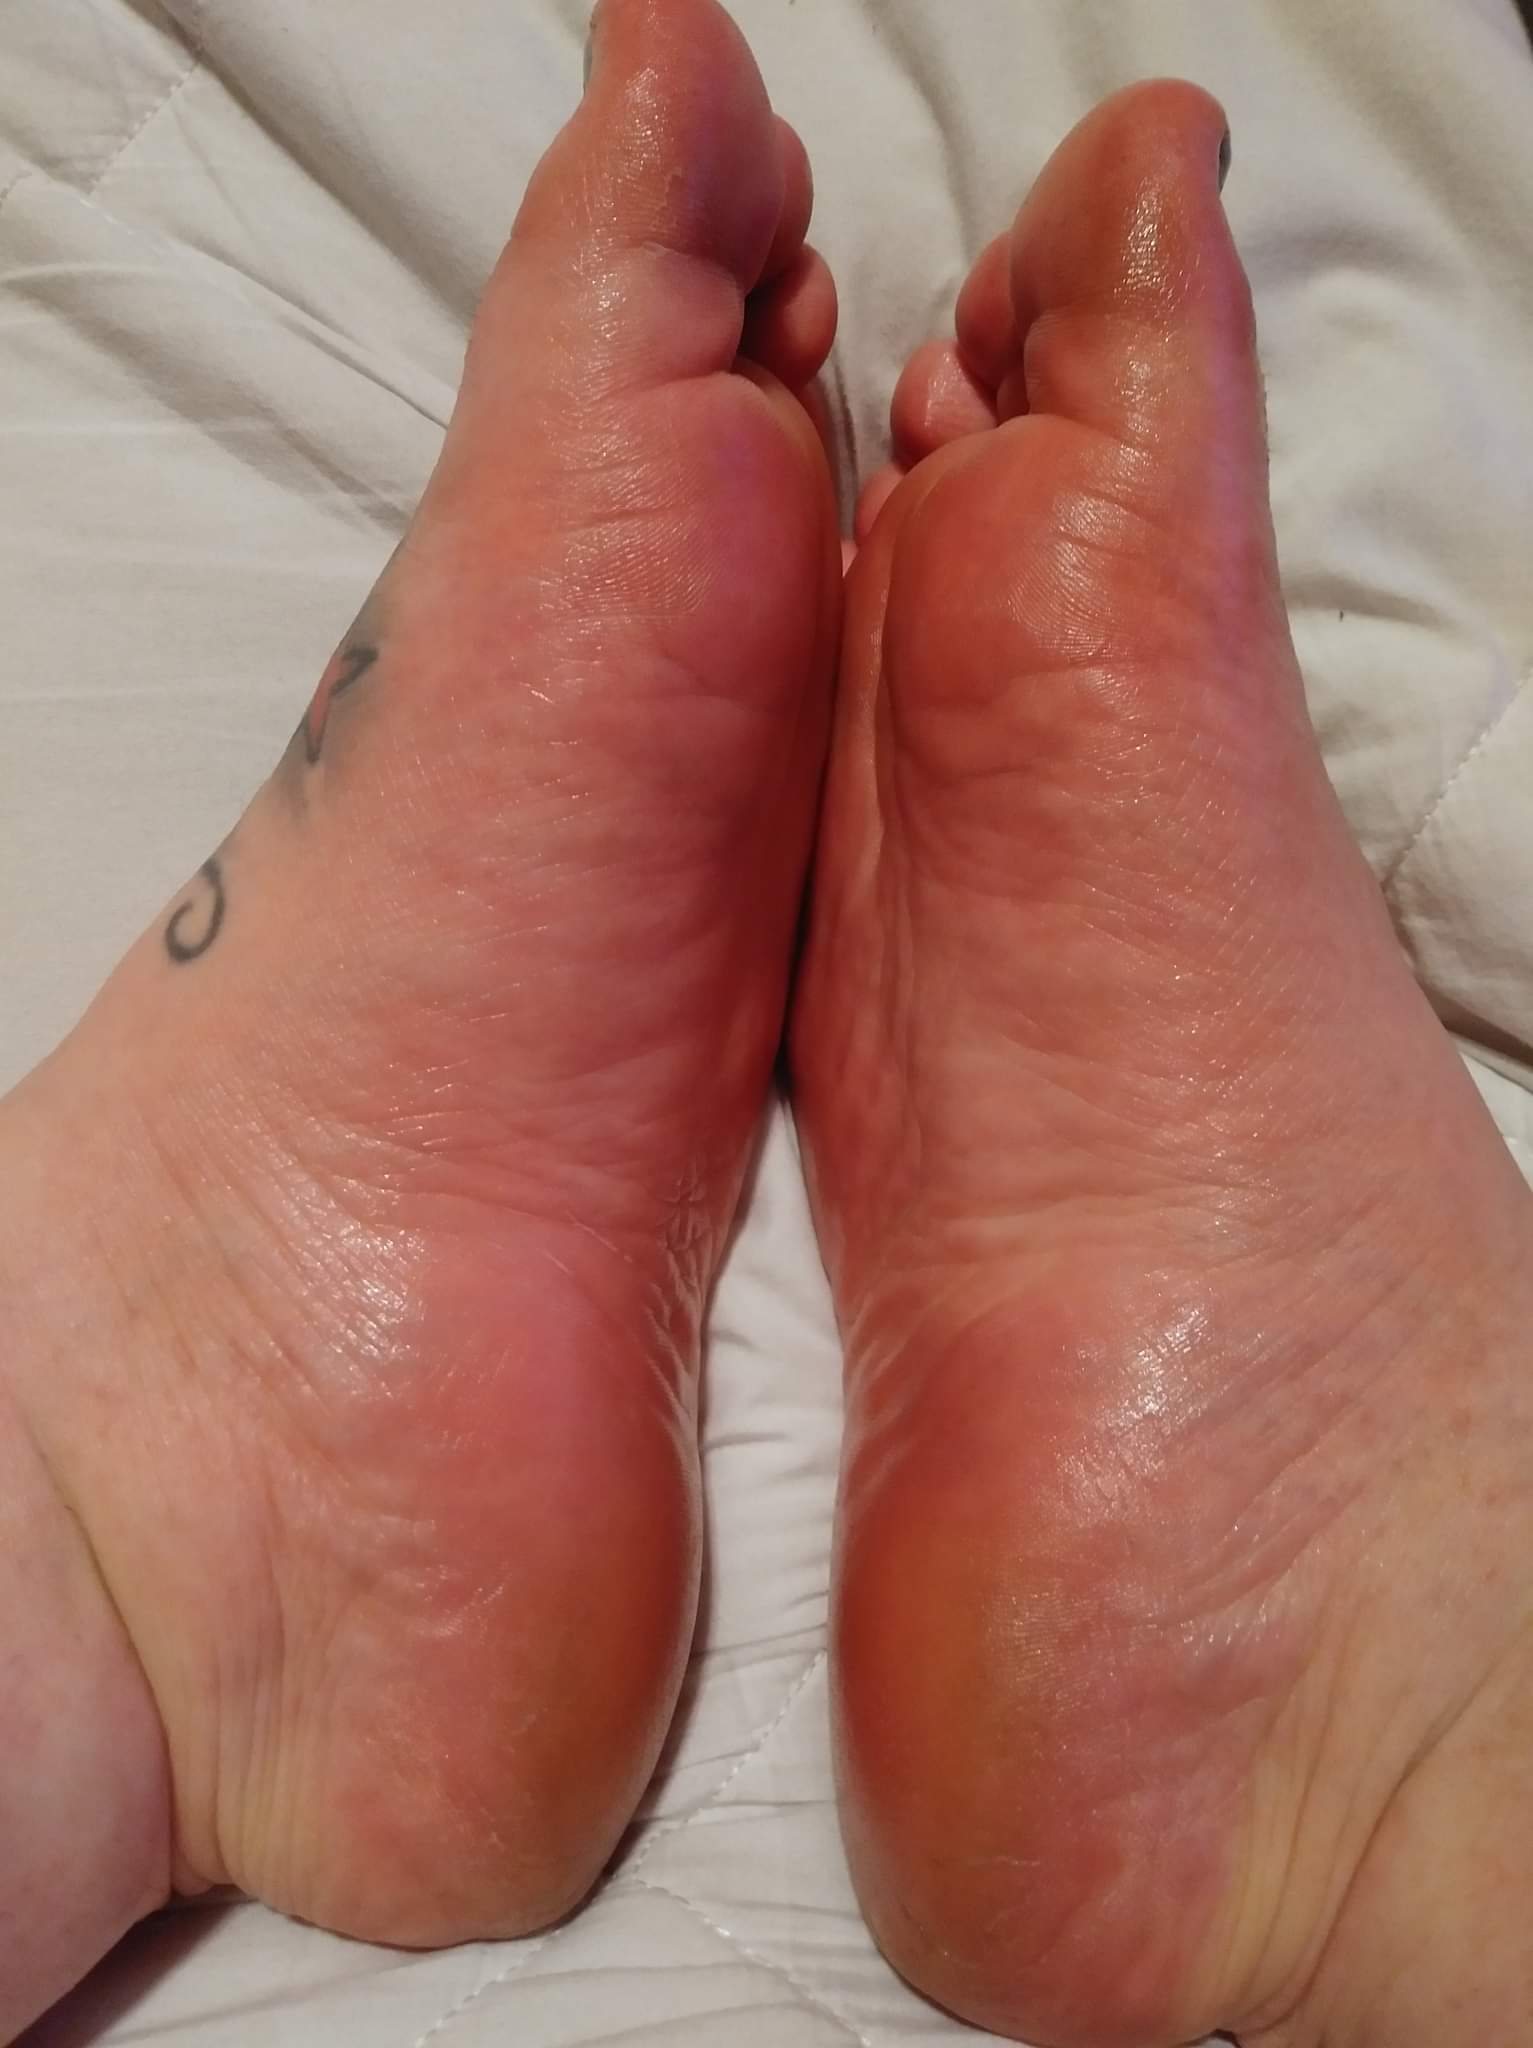 Week 2 of using Suzotic Hand and Foot Advanced Skin Care